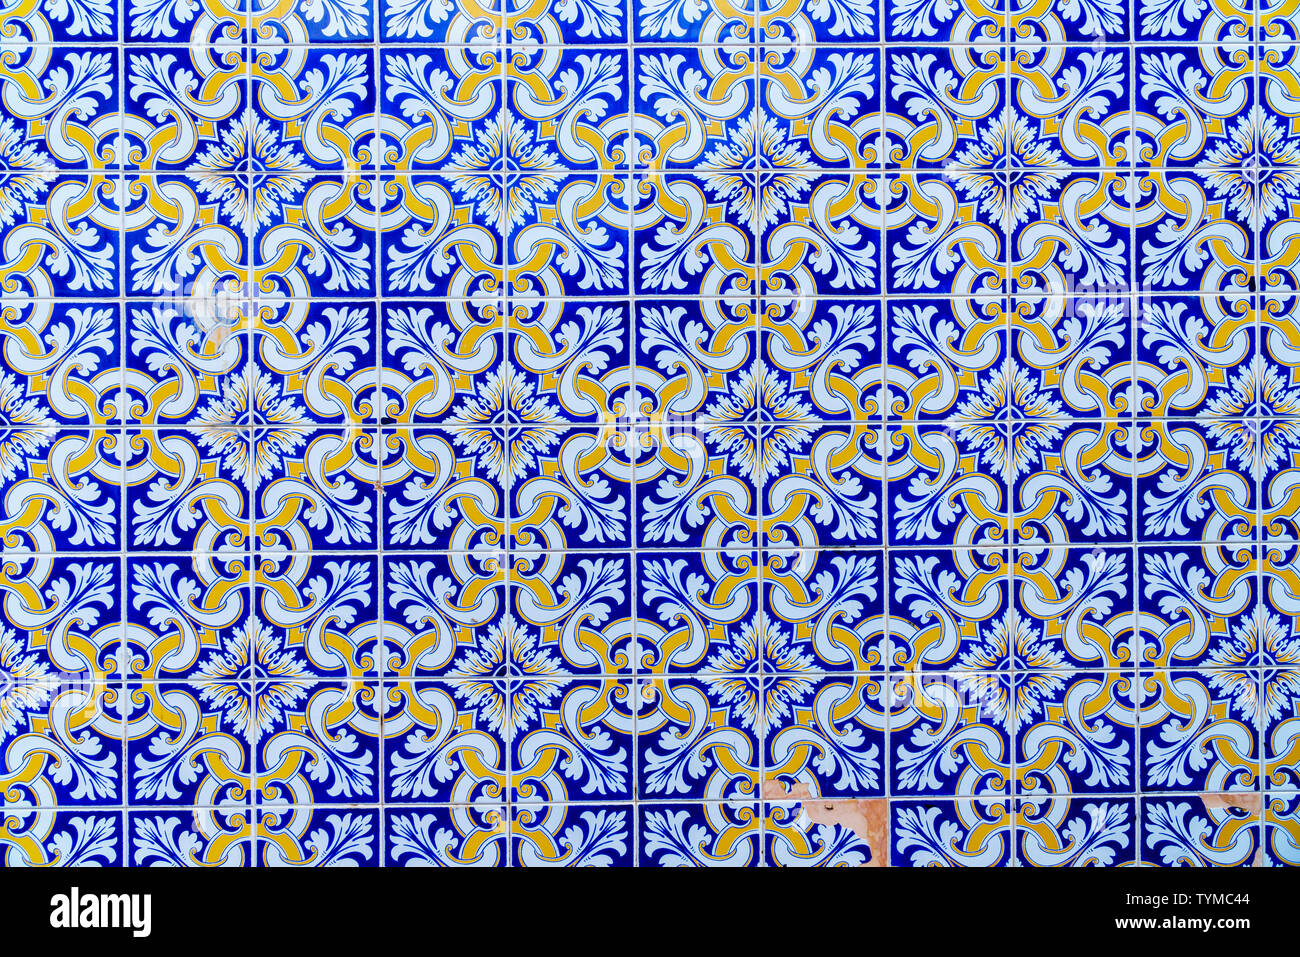 Repeated pattern of traditional Portuguese azulejo tiles - blue, yellow and white (close-up, frontal parallel view) Stock Photo